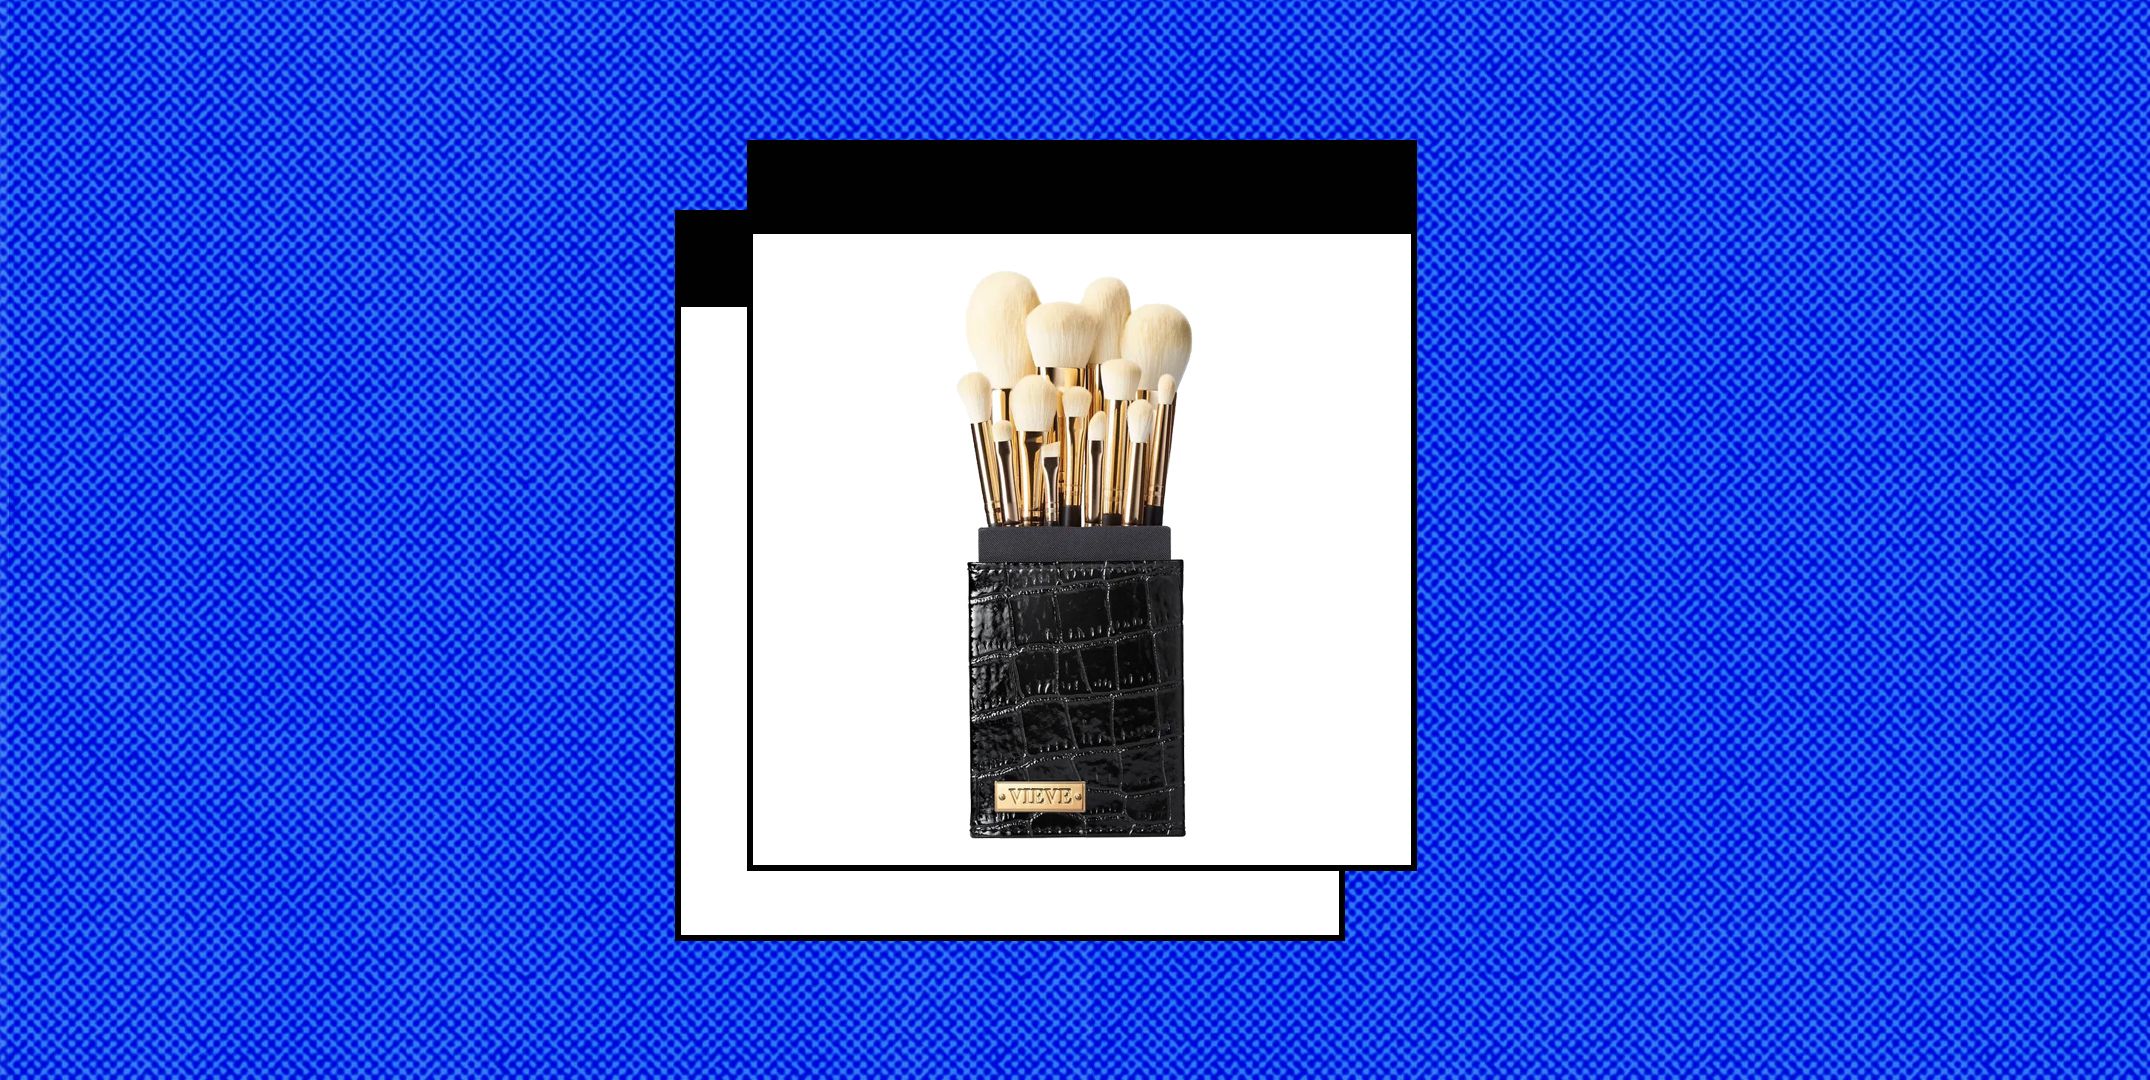 Ashley Blue Group Sex - Best Makeup Brushes 2022 - 15 Sets Our Beauty Editors Rate